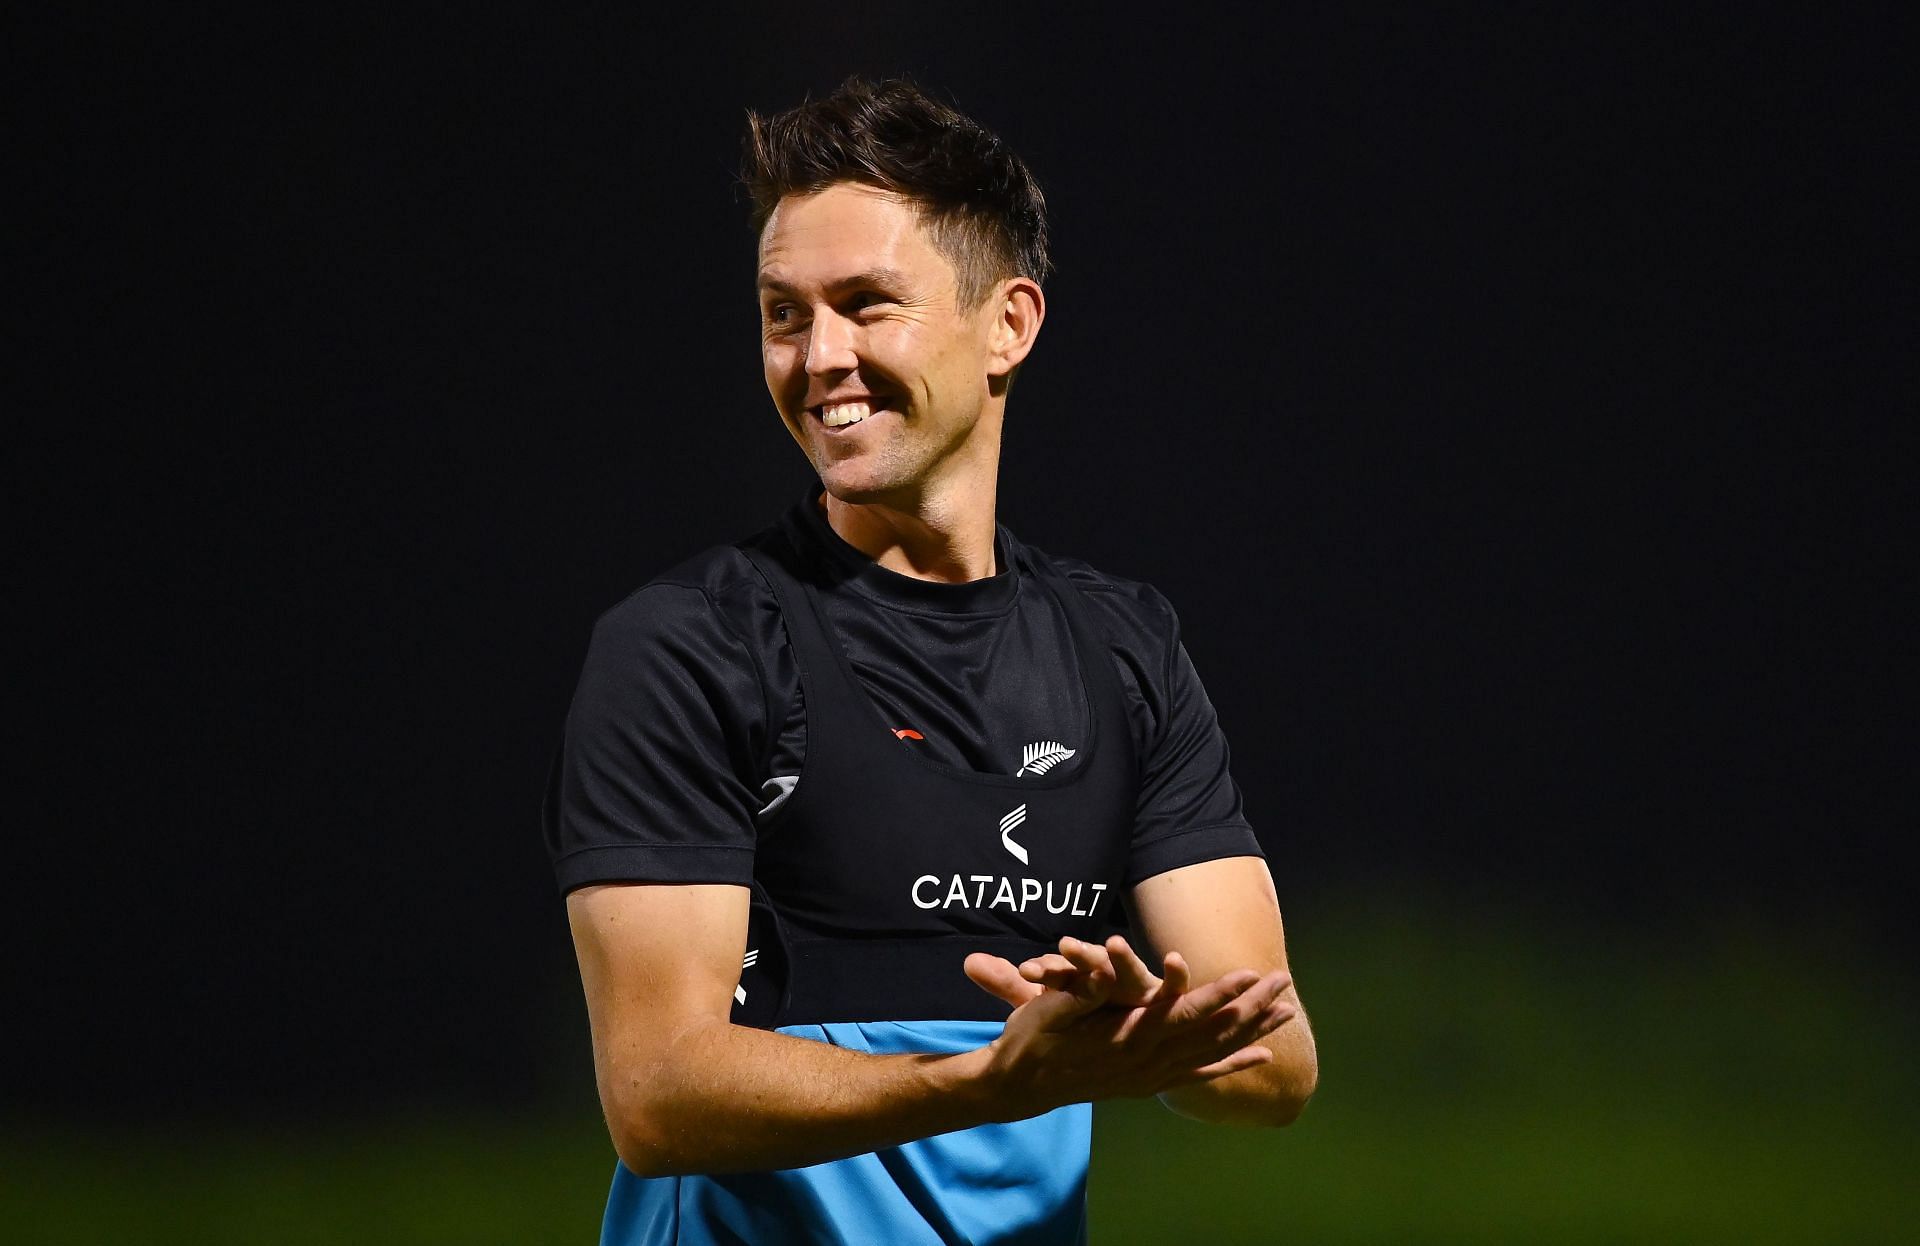 Trent Boult is one of the top fast bowlers in the world right now